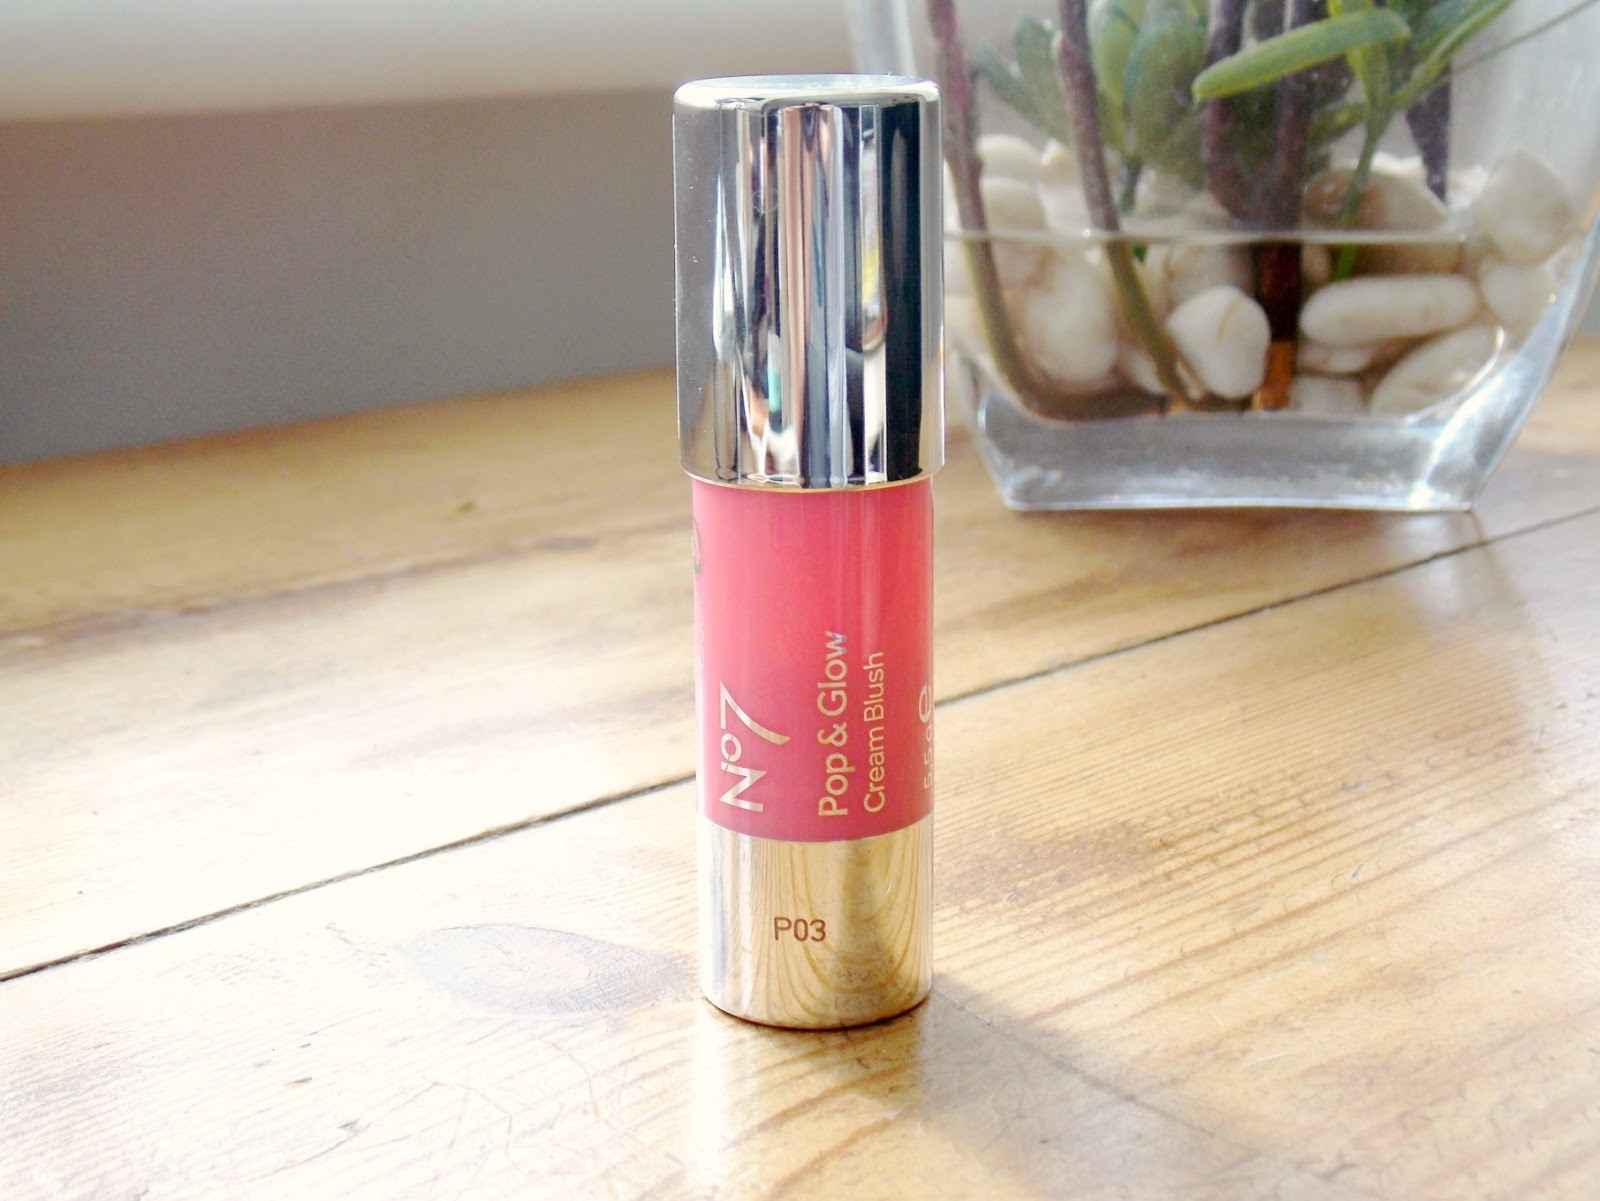 No 7 Pop & Glow Cream Blush Stick - Review & Swatches | Beauty Dressed